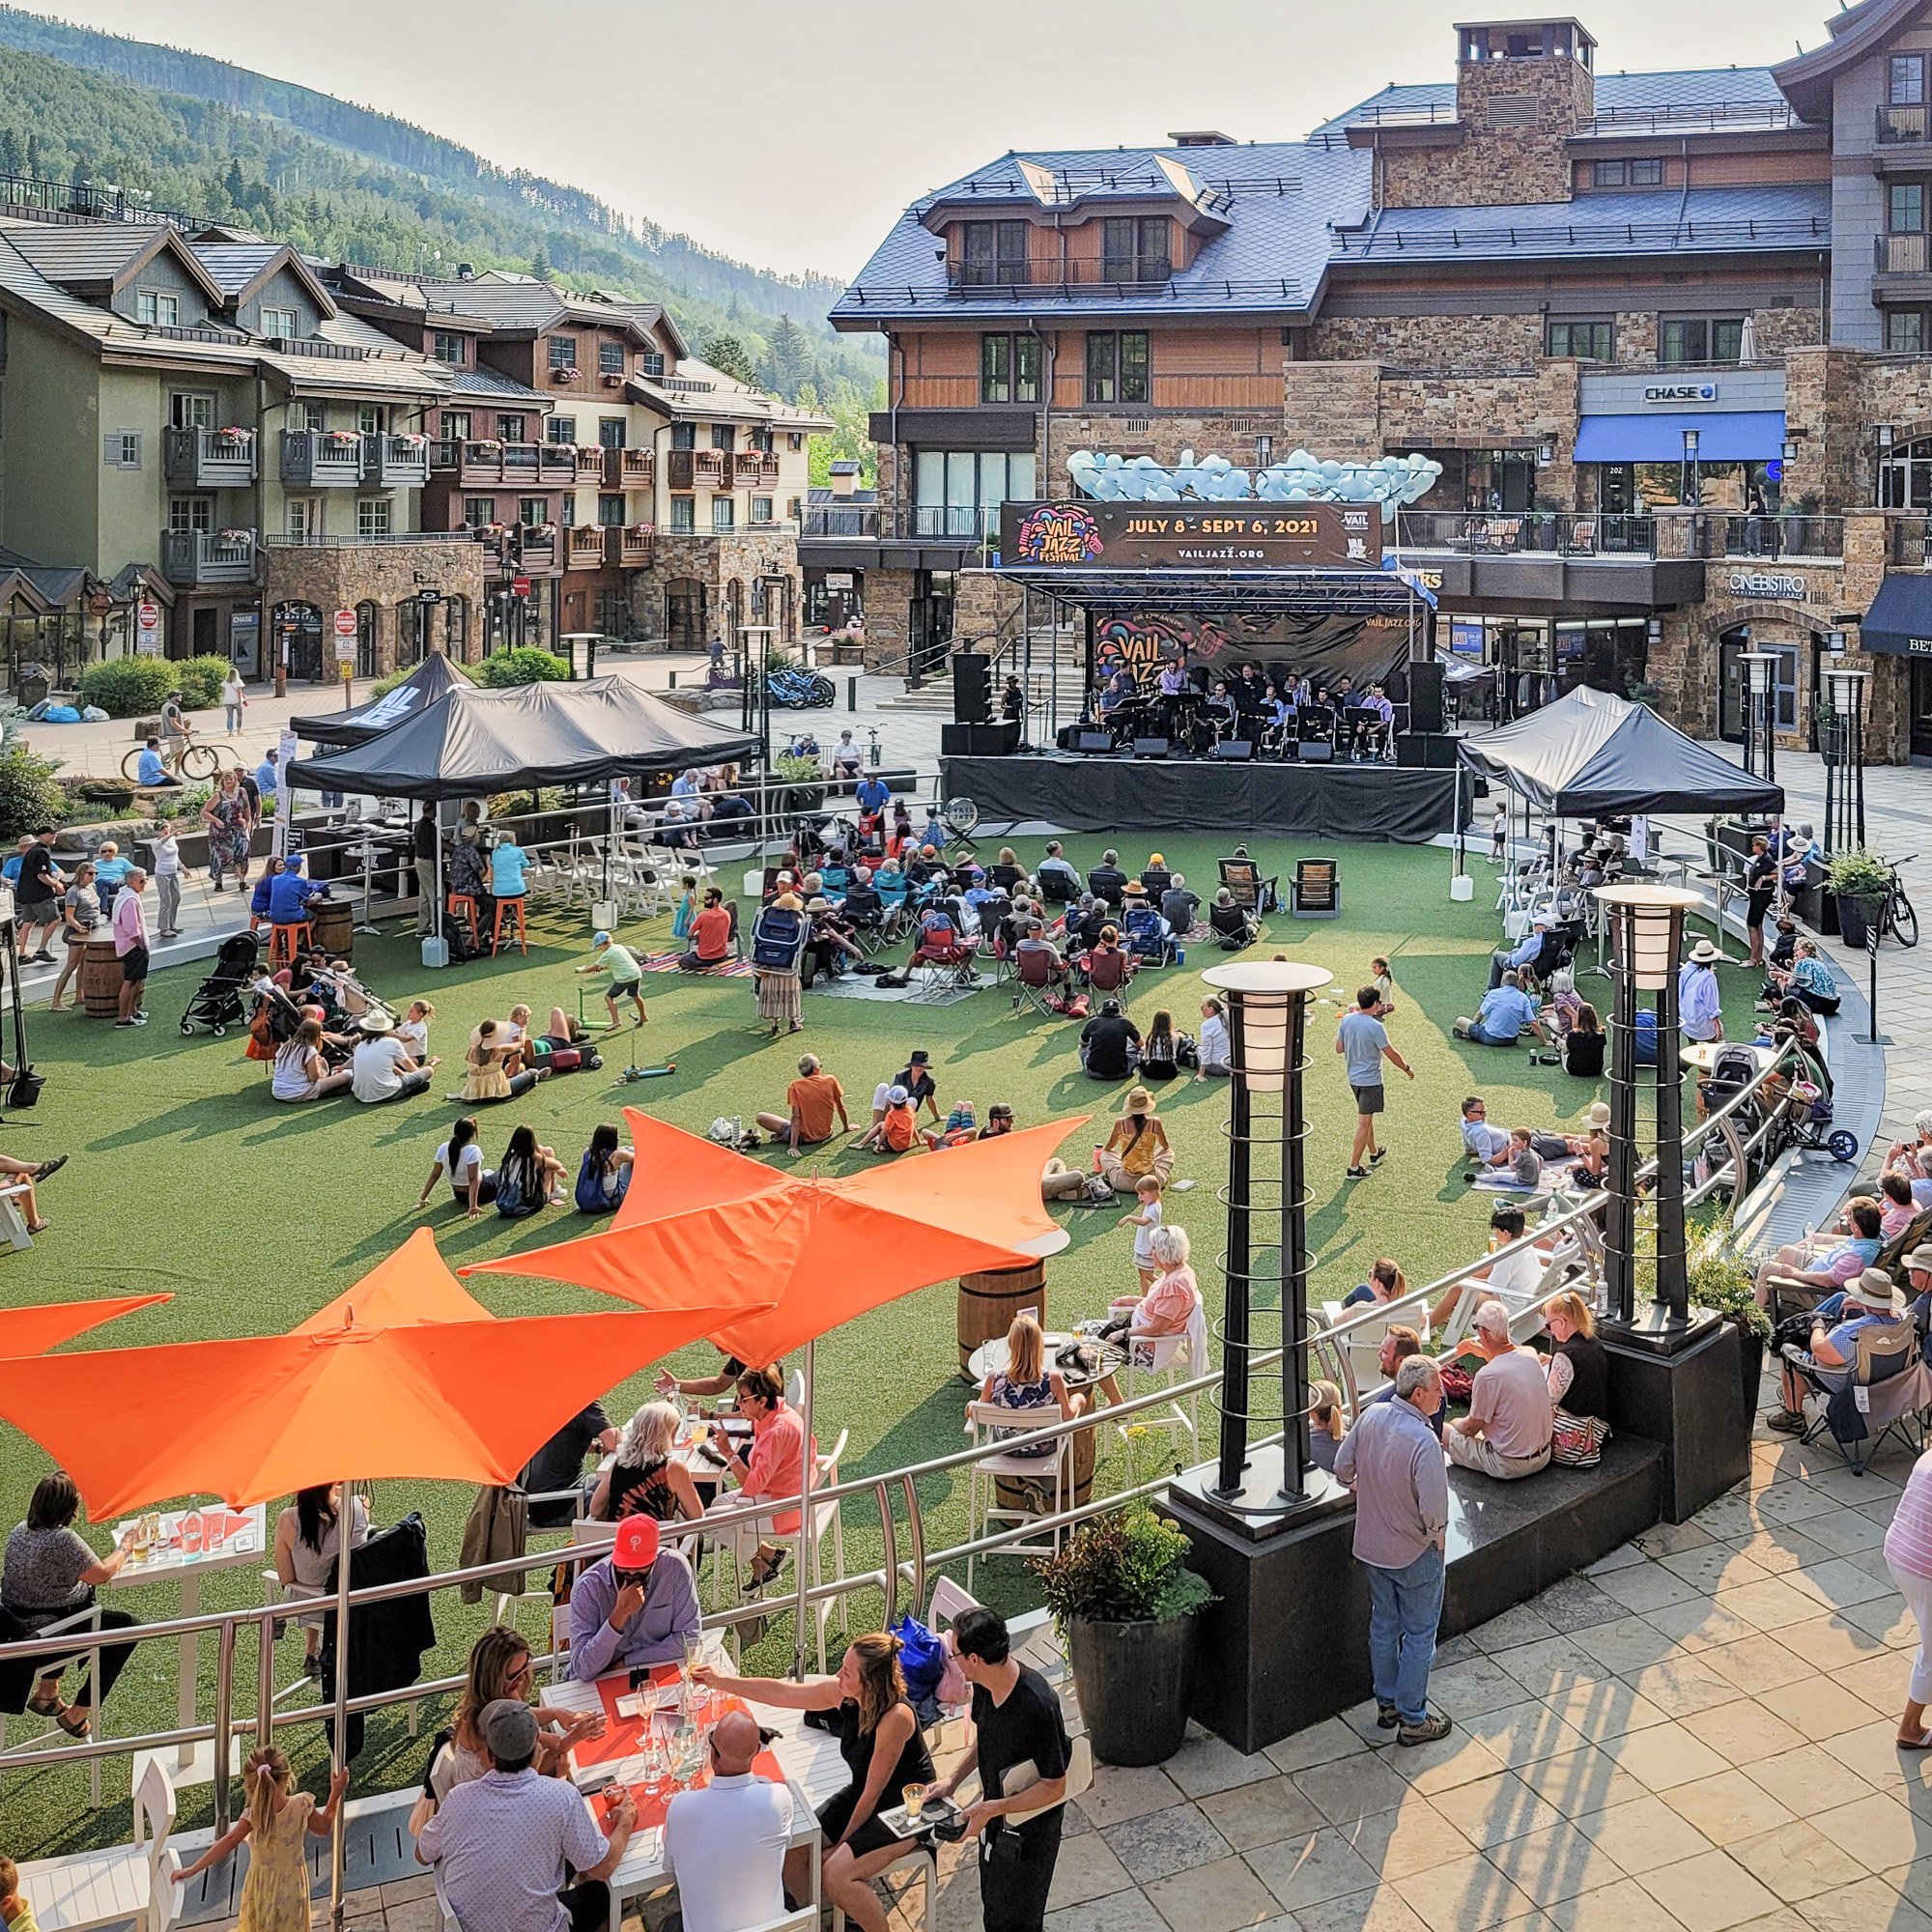 The Vail Jazz Festival is in Full Swing Colorado Homes & Lifestyles